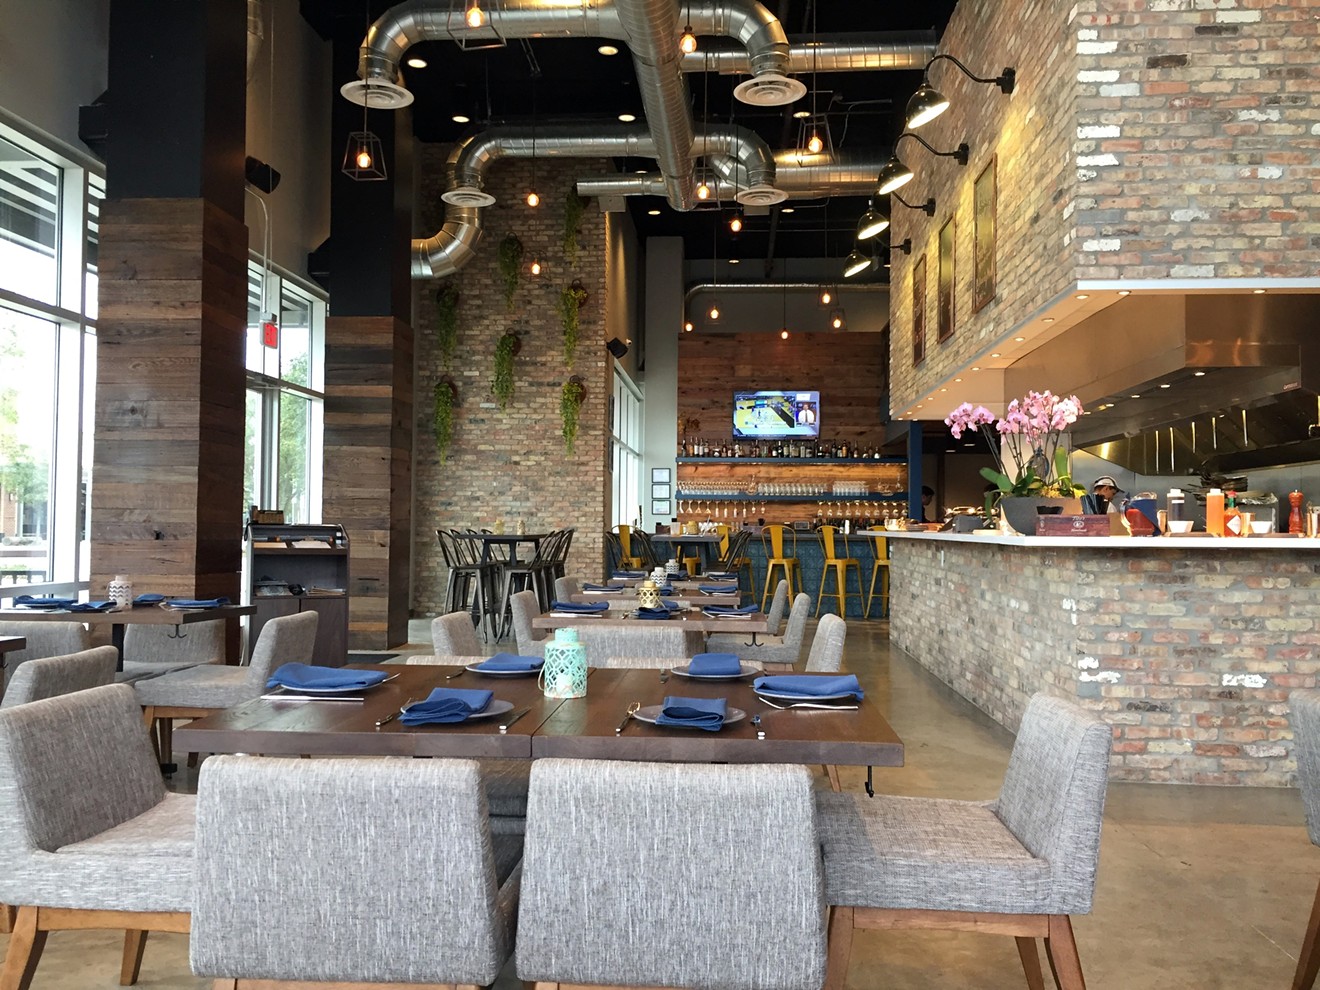 The decor of Broken Barrel is contemporary and features an open kitchen in the center of the restaurant.